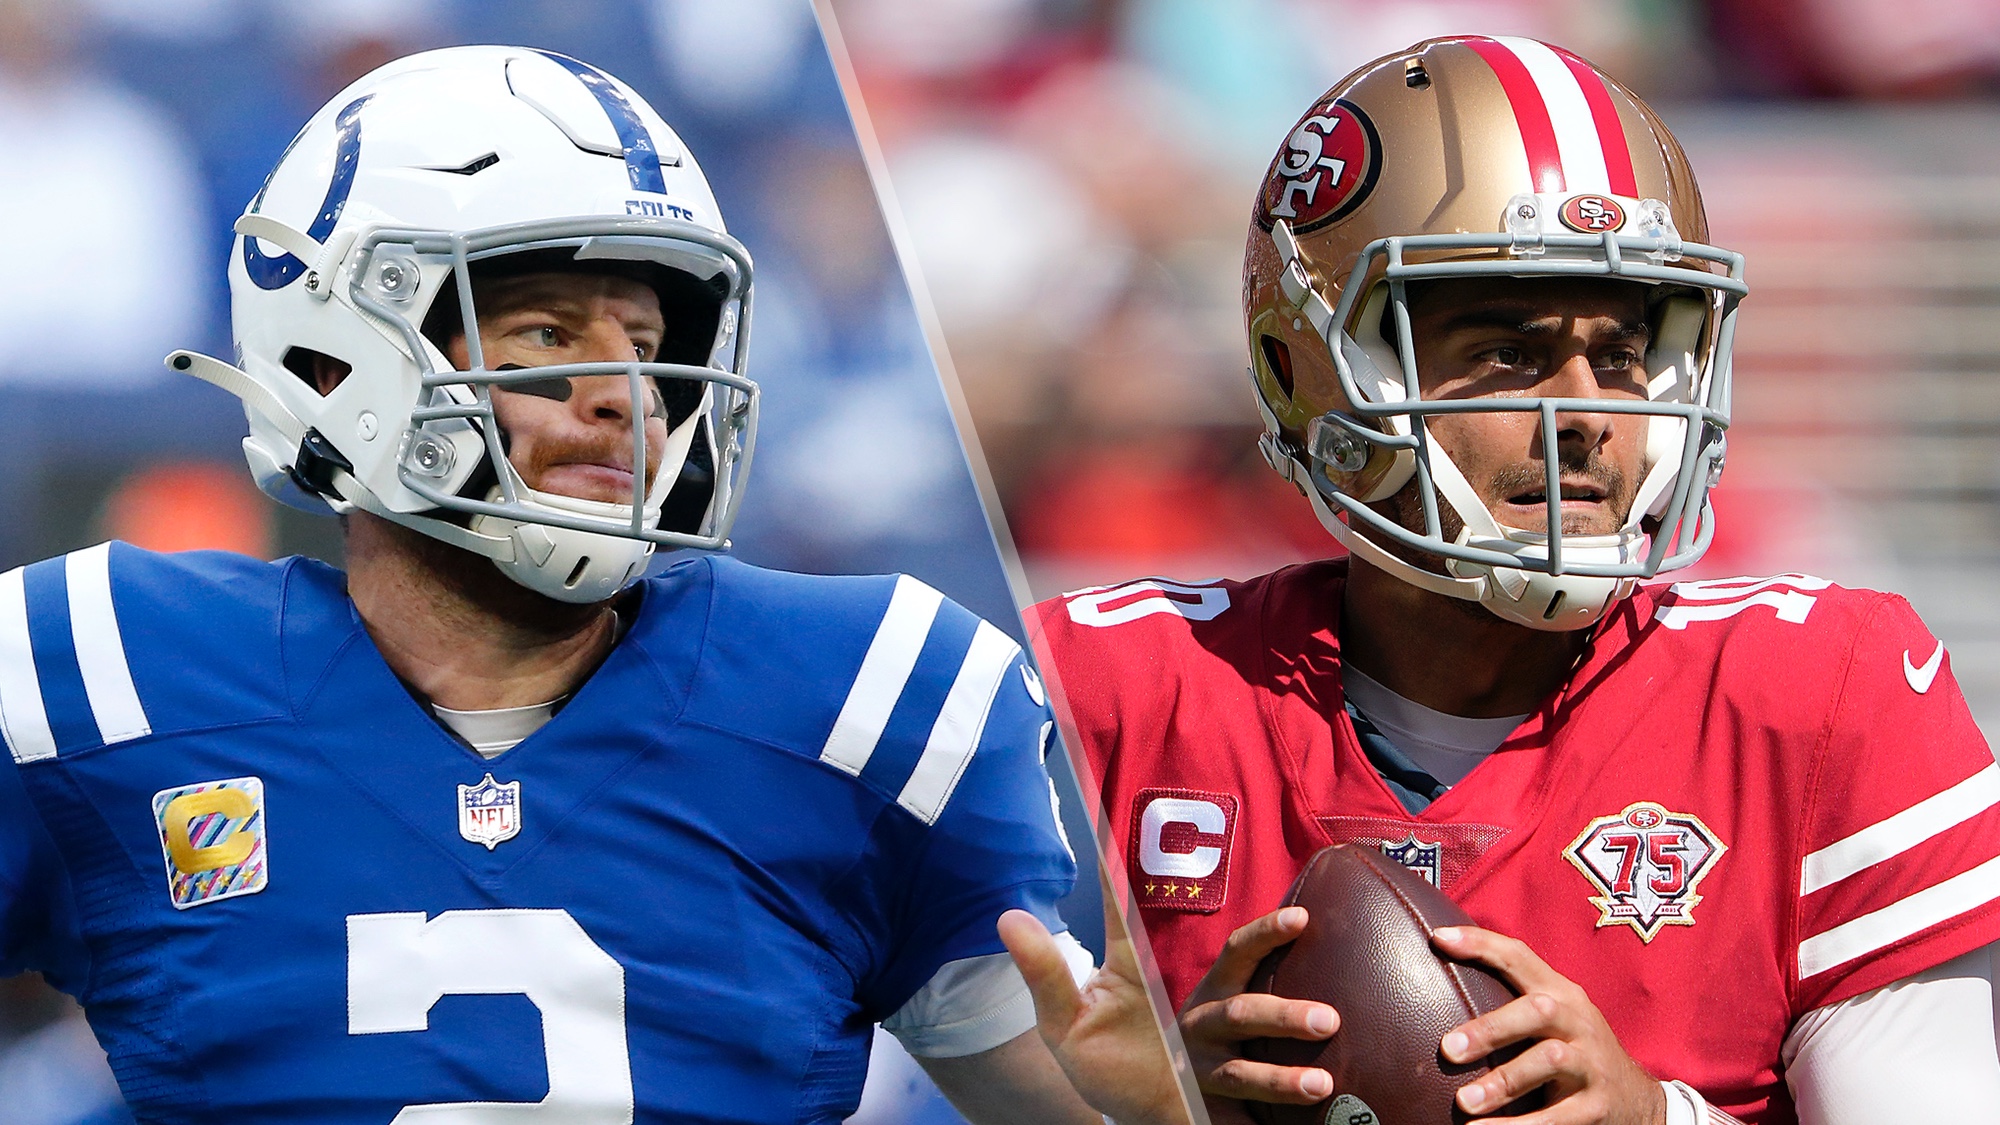 Colts vs 49ers live stream: How to watch Sunday Night Football